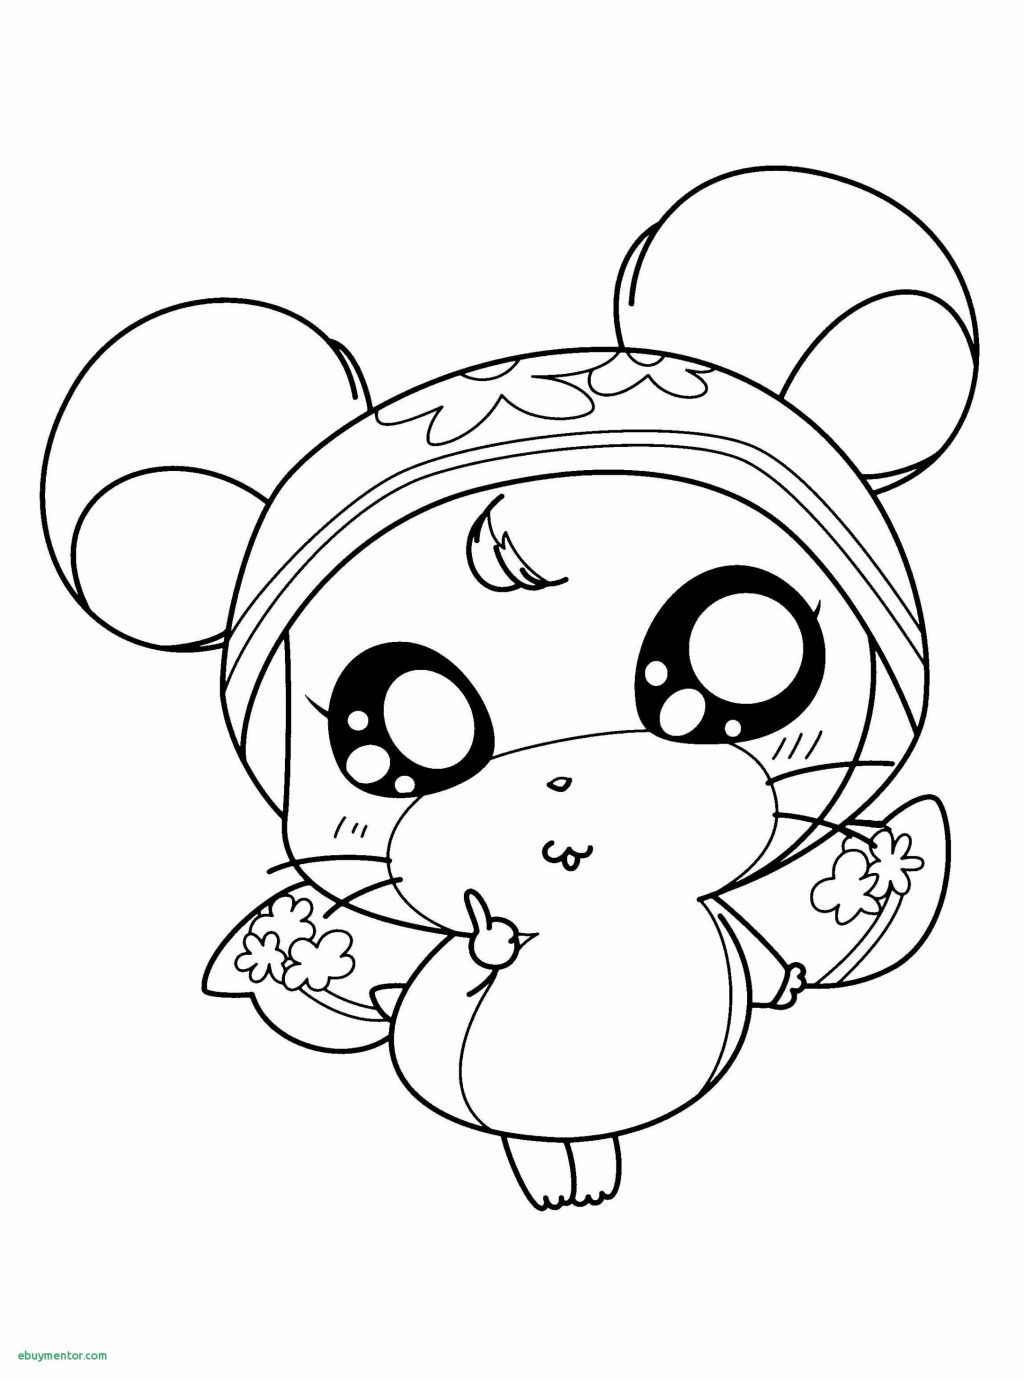 Taz Cartoon Coloring Pages Coloring Pages For Kids With New Ba Printable Coloring Page For Kids